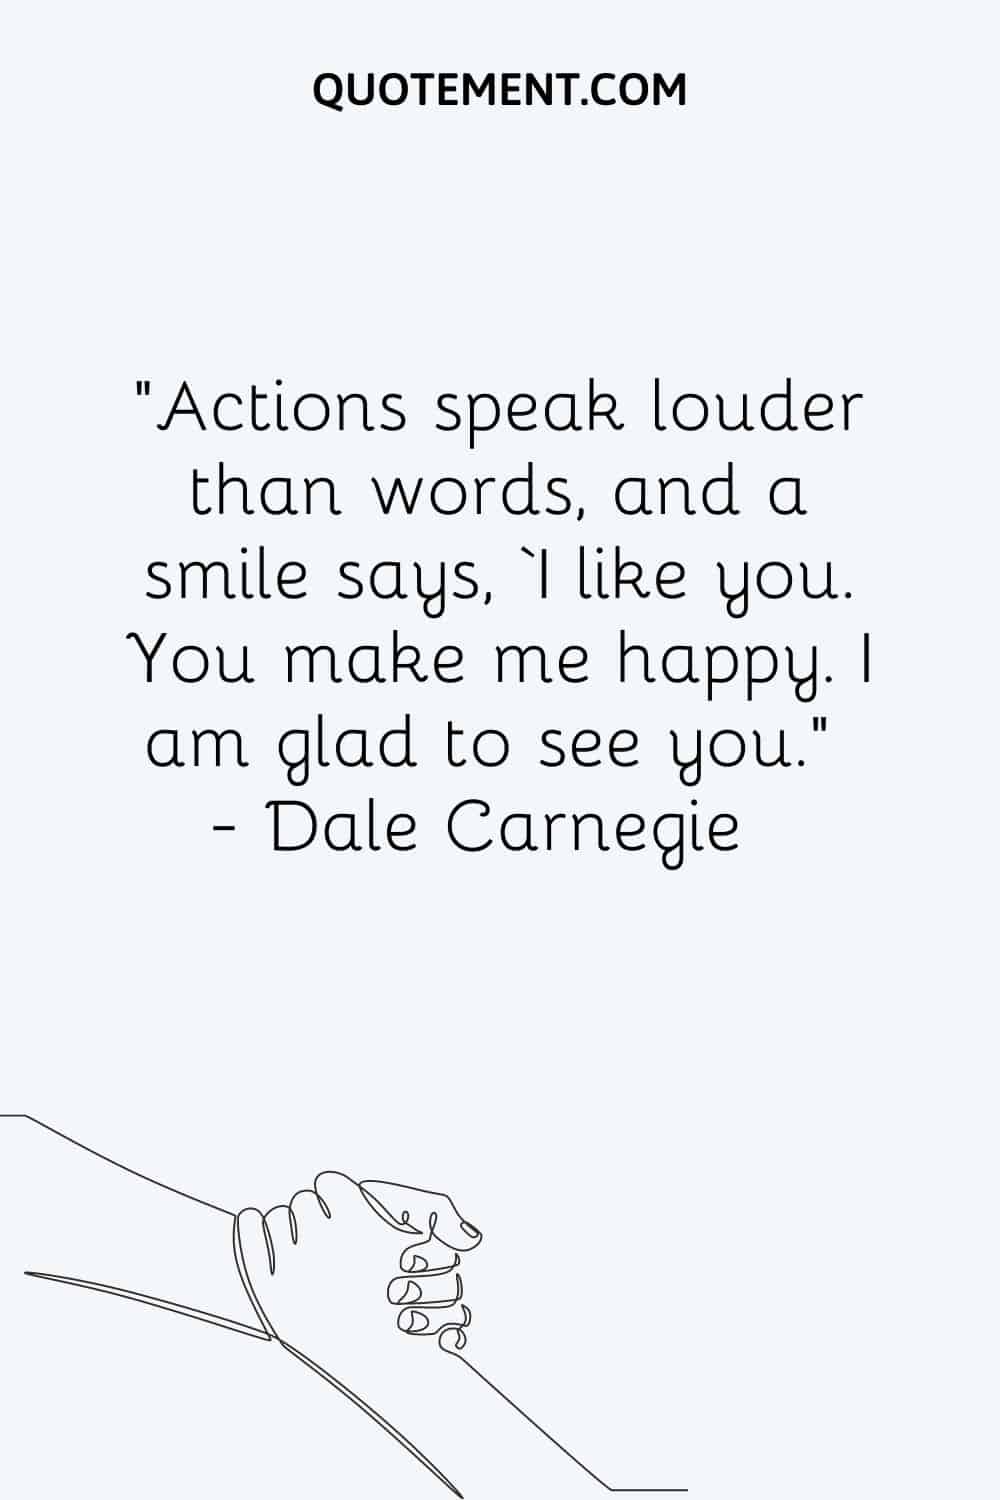 Actions speak louder than words, and a smile says, ‘I like you.